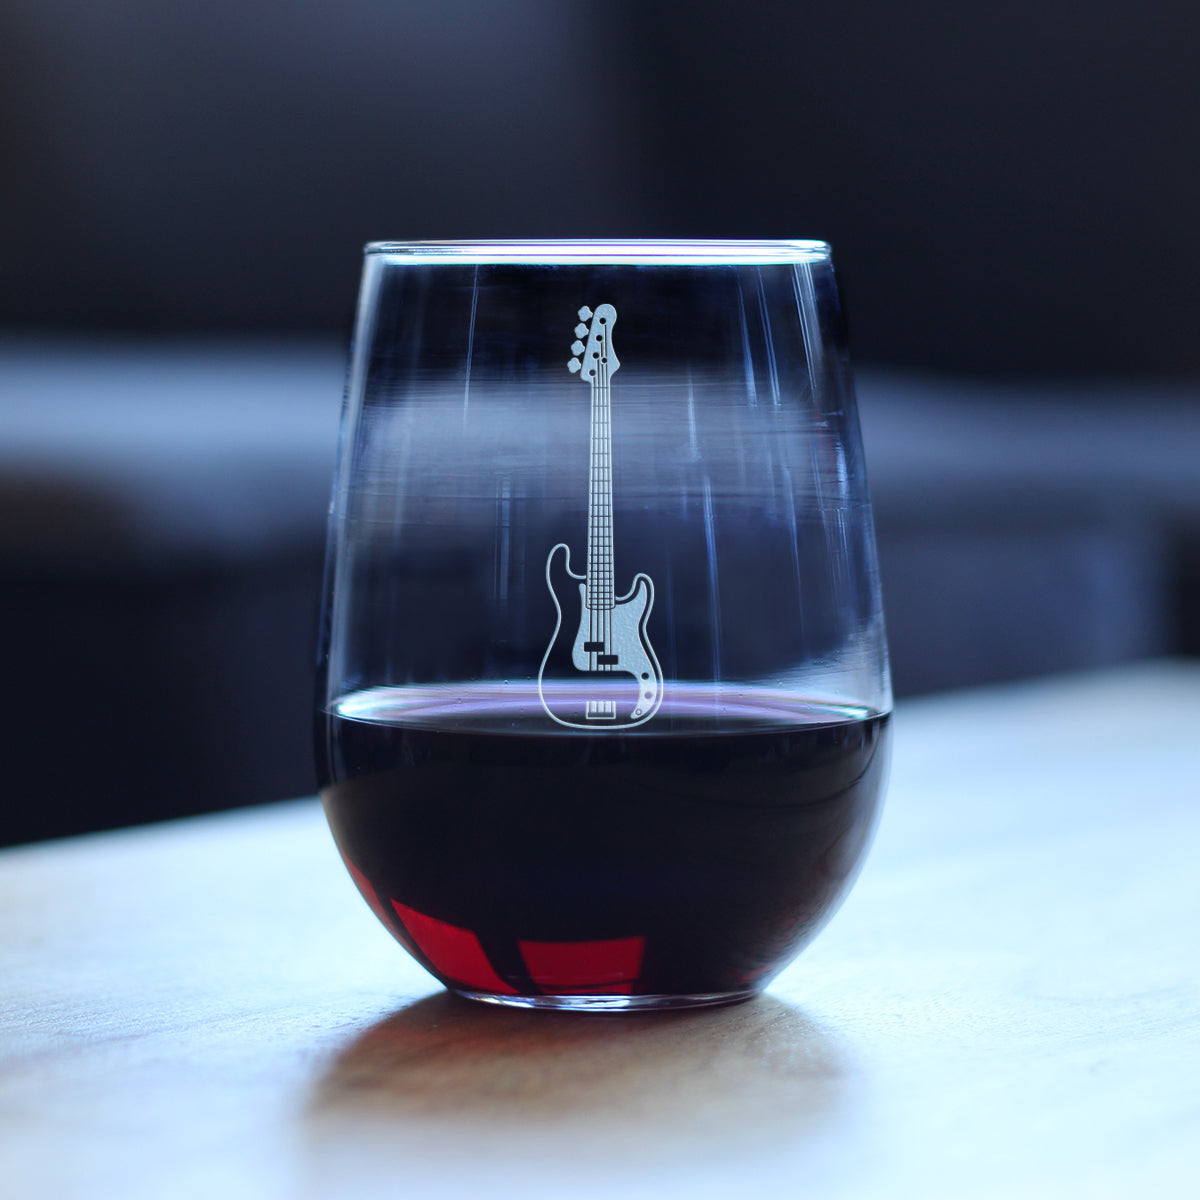 Electric Bass Stemless Wine Glass - Music Gifts for Bass Players, Teachers and Musical Accessories for Musicians that Play Bass Guitar - Large 17 Oz Glasses